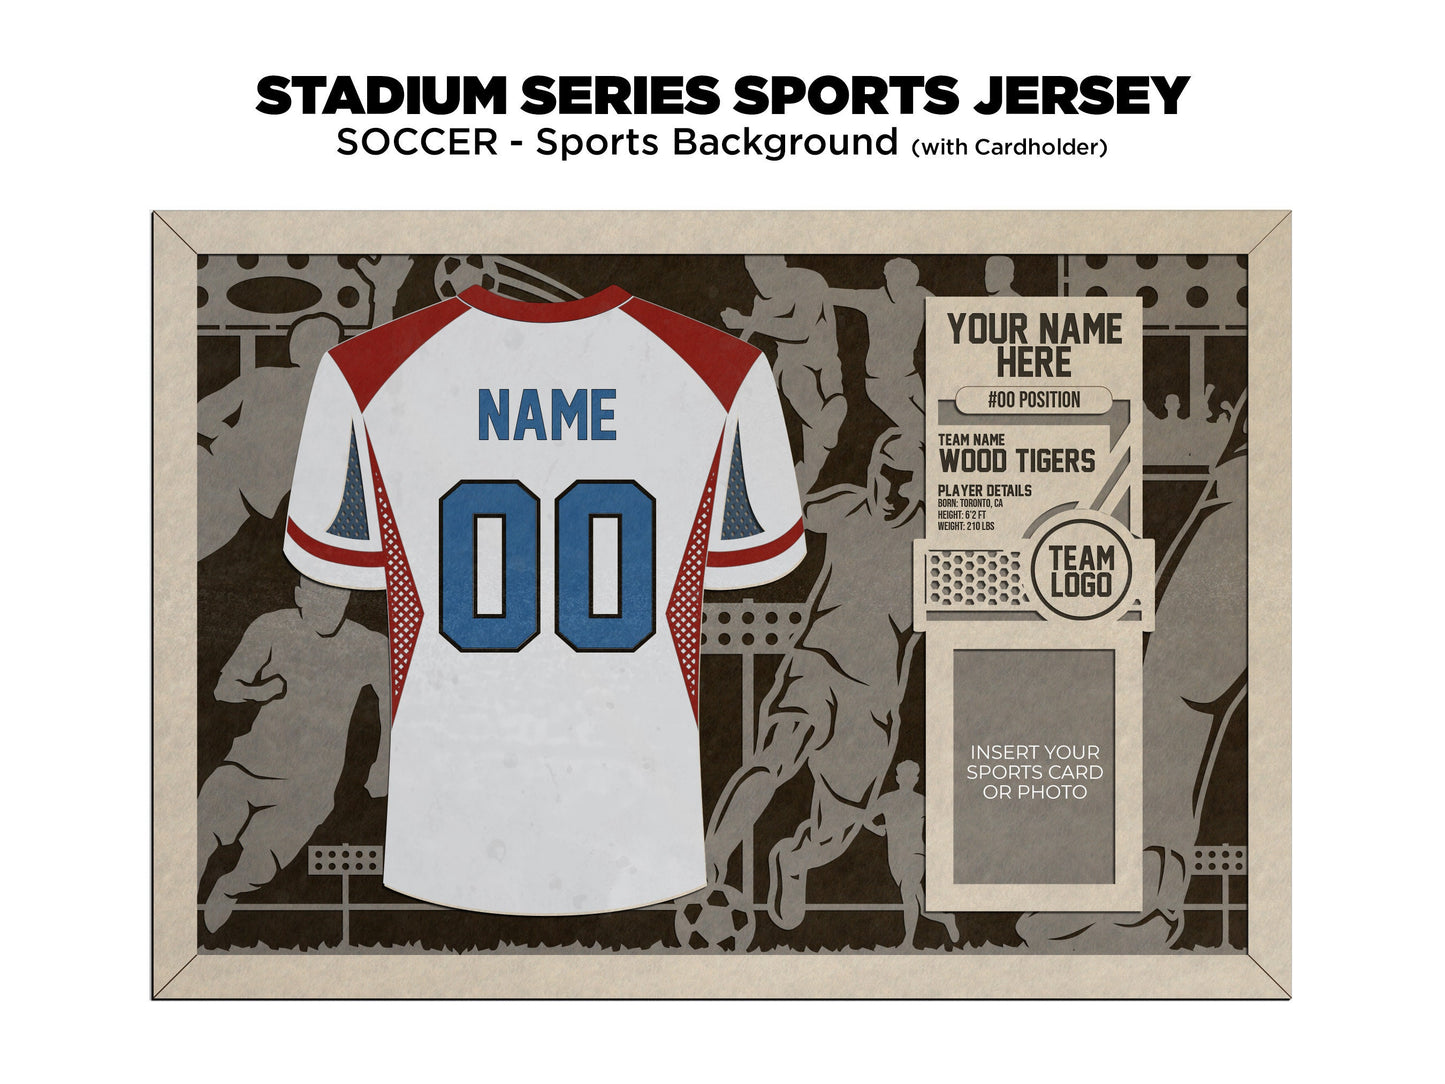 Stadium Series Jerseys - Soccer - 3 Variations - Male, Female & Alternate Backgrounds - SVG File Download - Sized for Glowforge